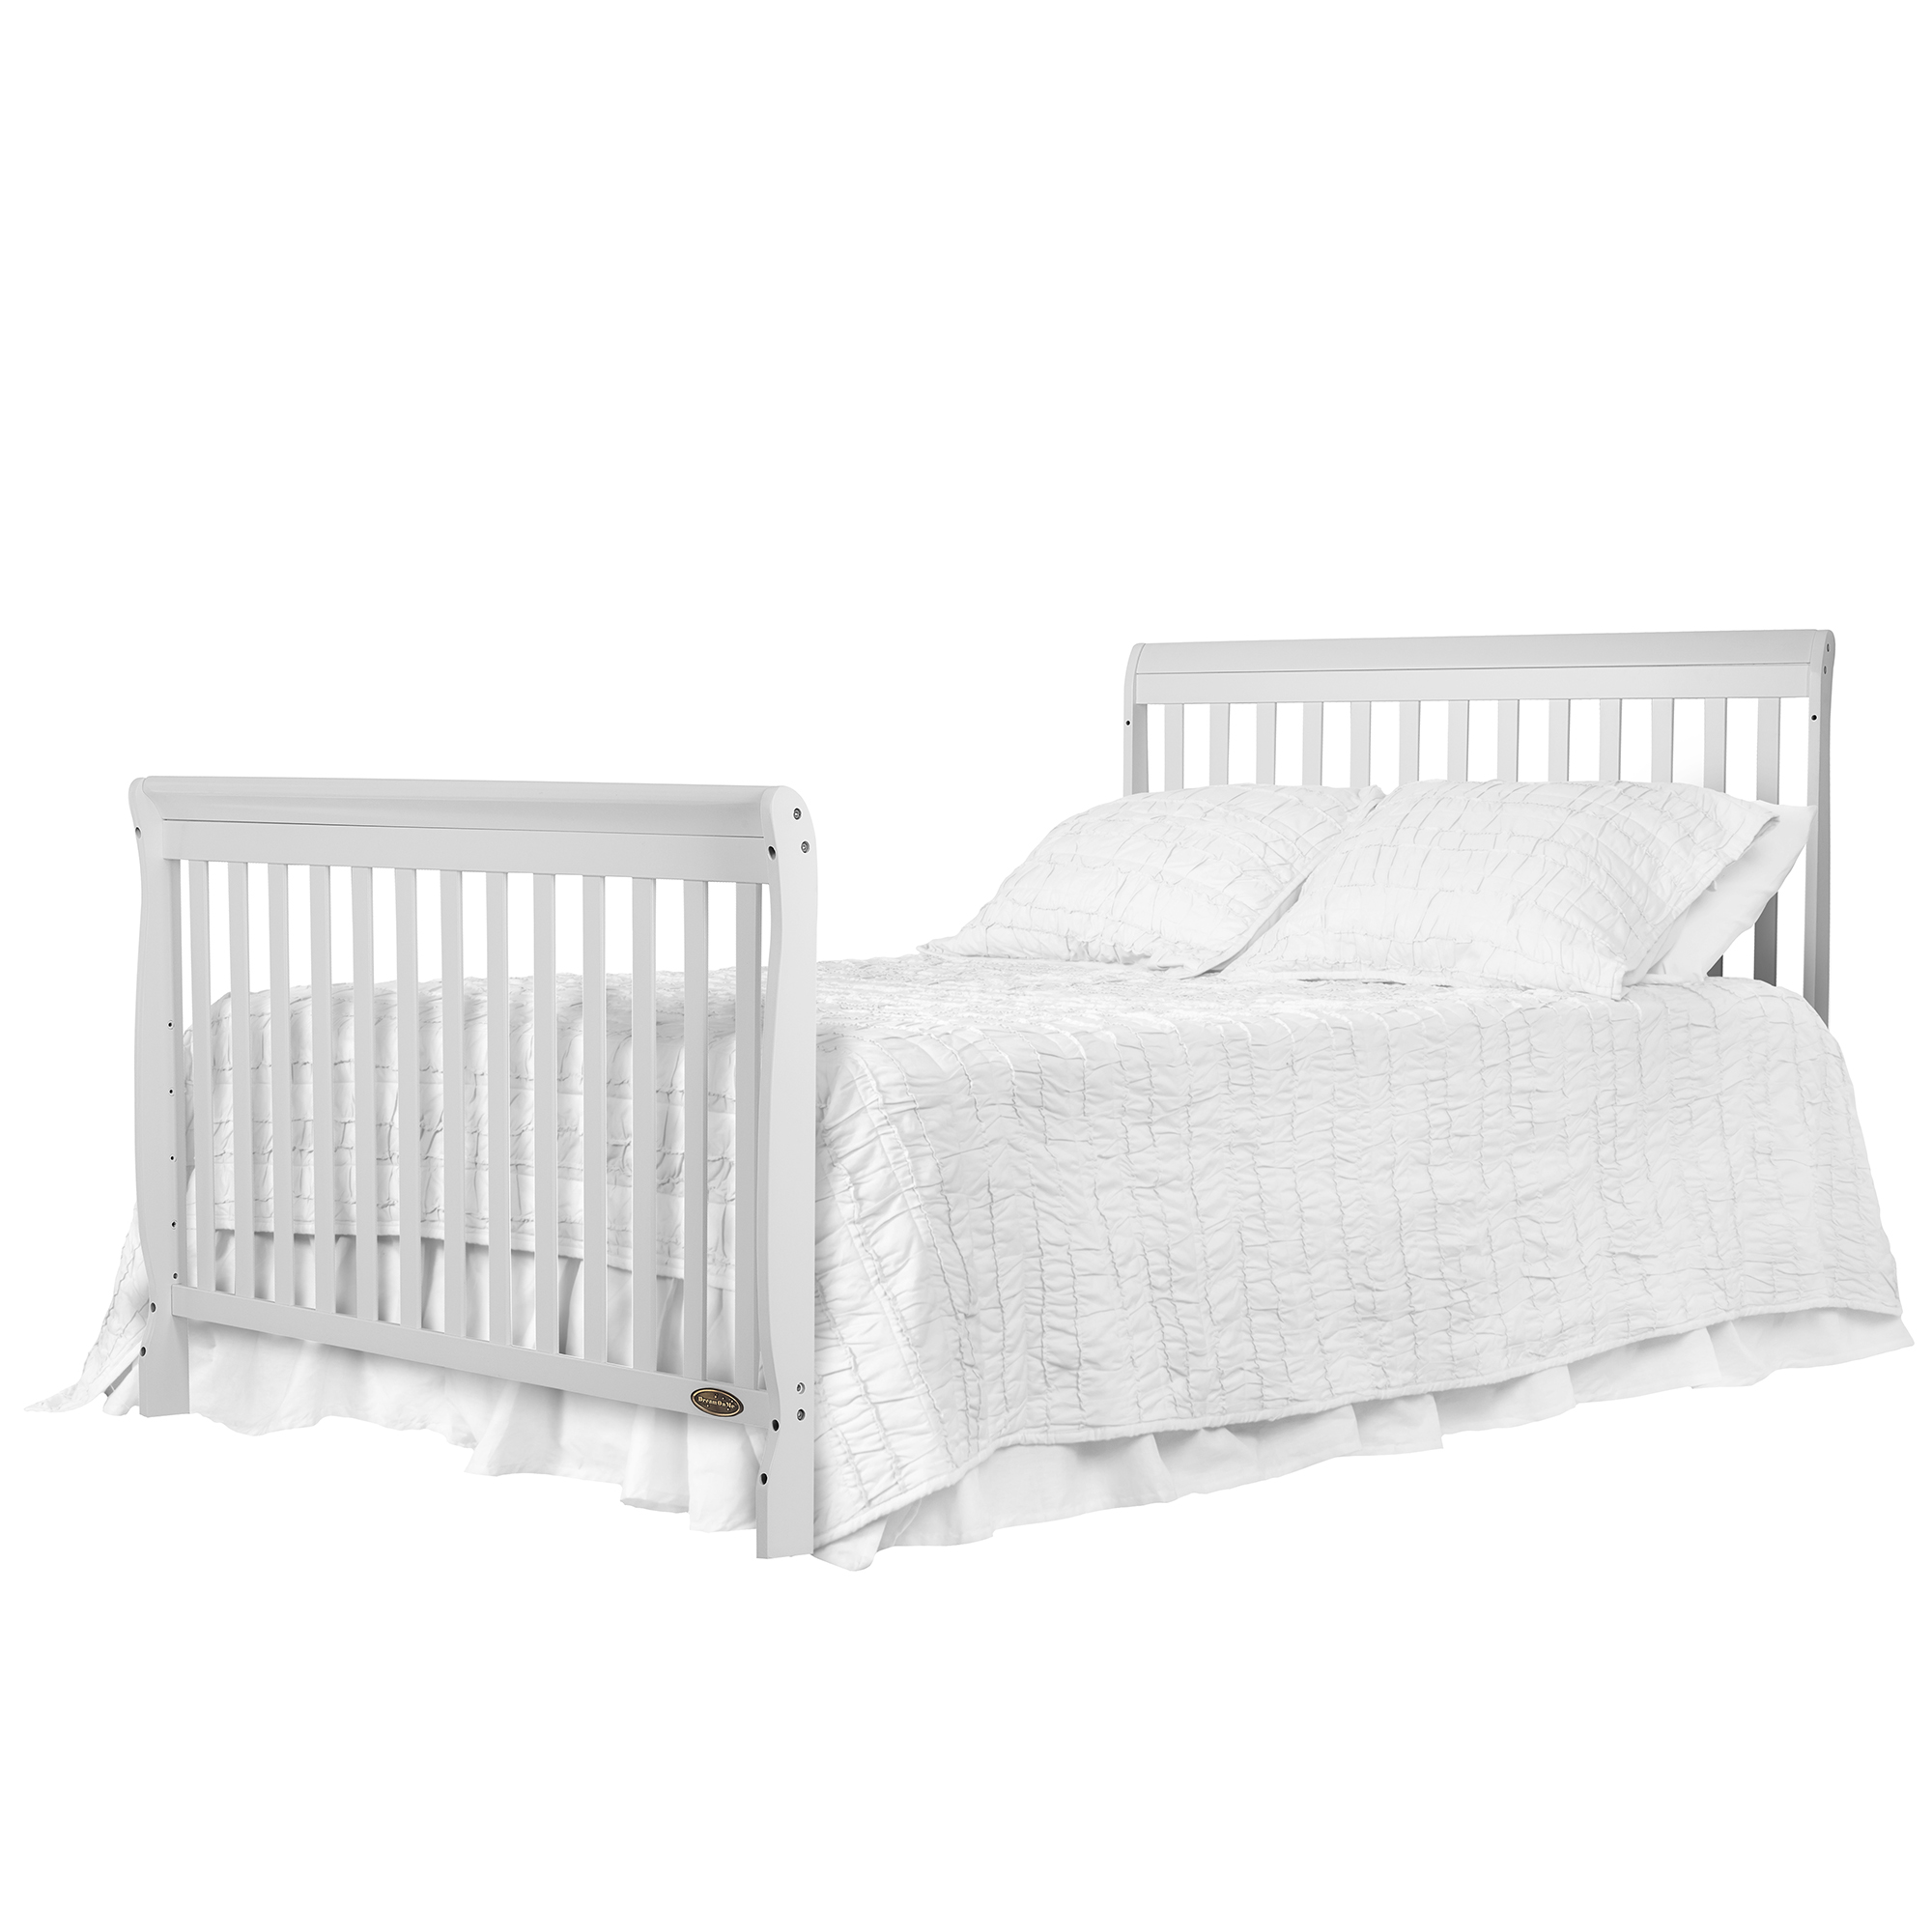 Dream On Me Ashton 5-in-1 Convertible Crib, White, Greenguard Gold and JPMA Certified - image 5 of 14